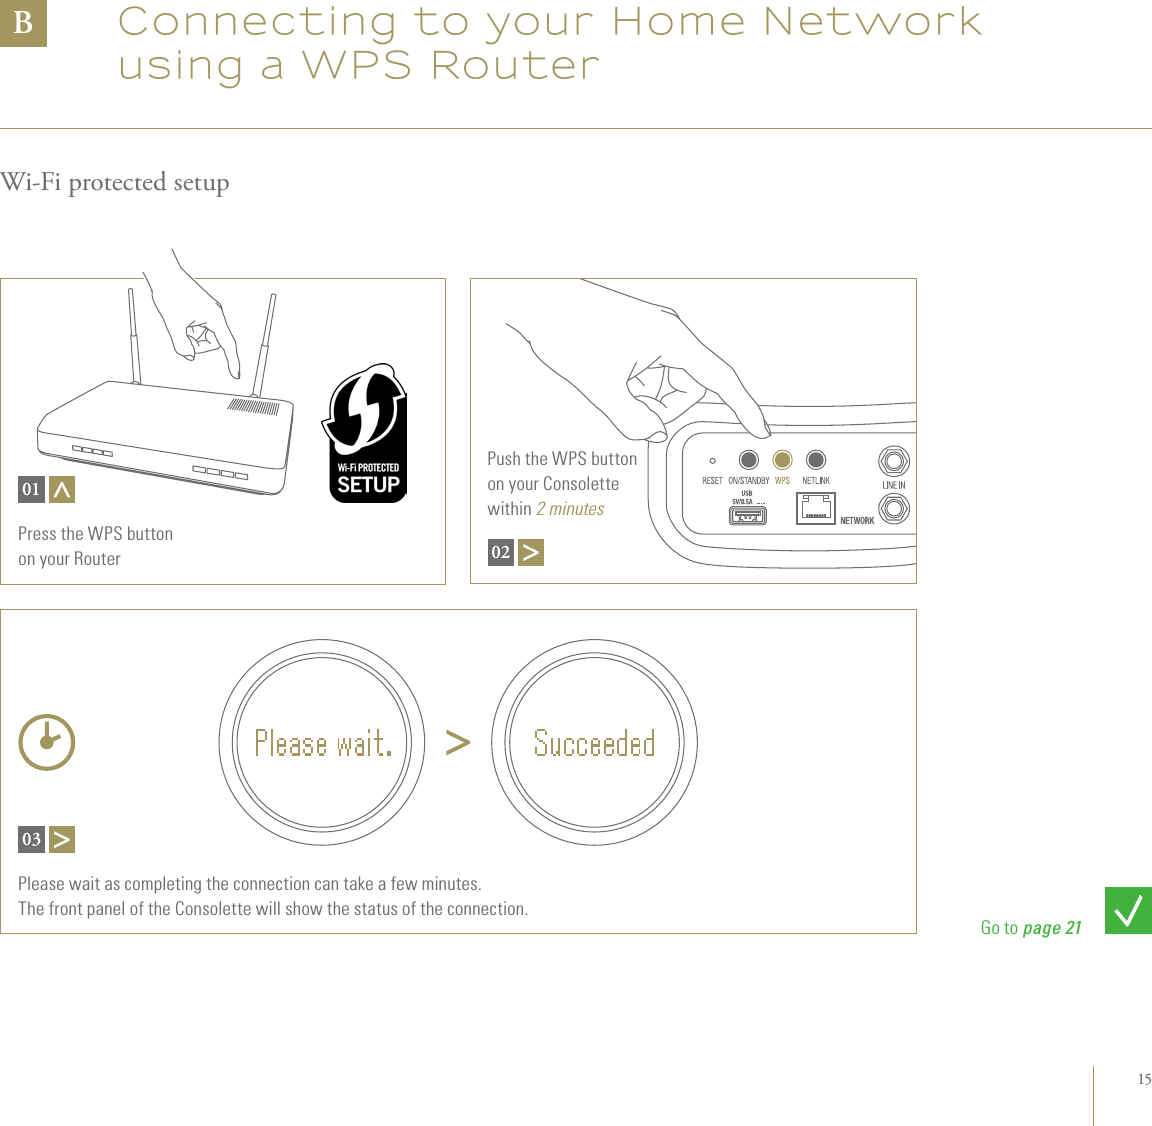 15Connecting to your Home Network using a WPS RouterWi-Fi protected setupBPush the WPS button  on your Consolette within 2 minutes02Please wait as completing the connection can take a few minutes.  The front panel of the Consolette will show the status of the connection.03Press the WPS button  on your Router01Go to page 21